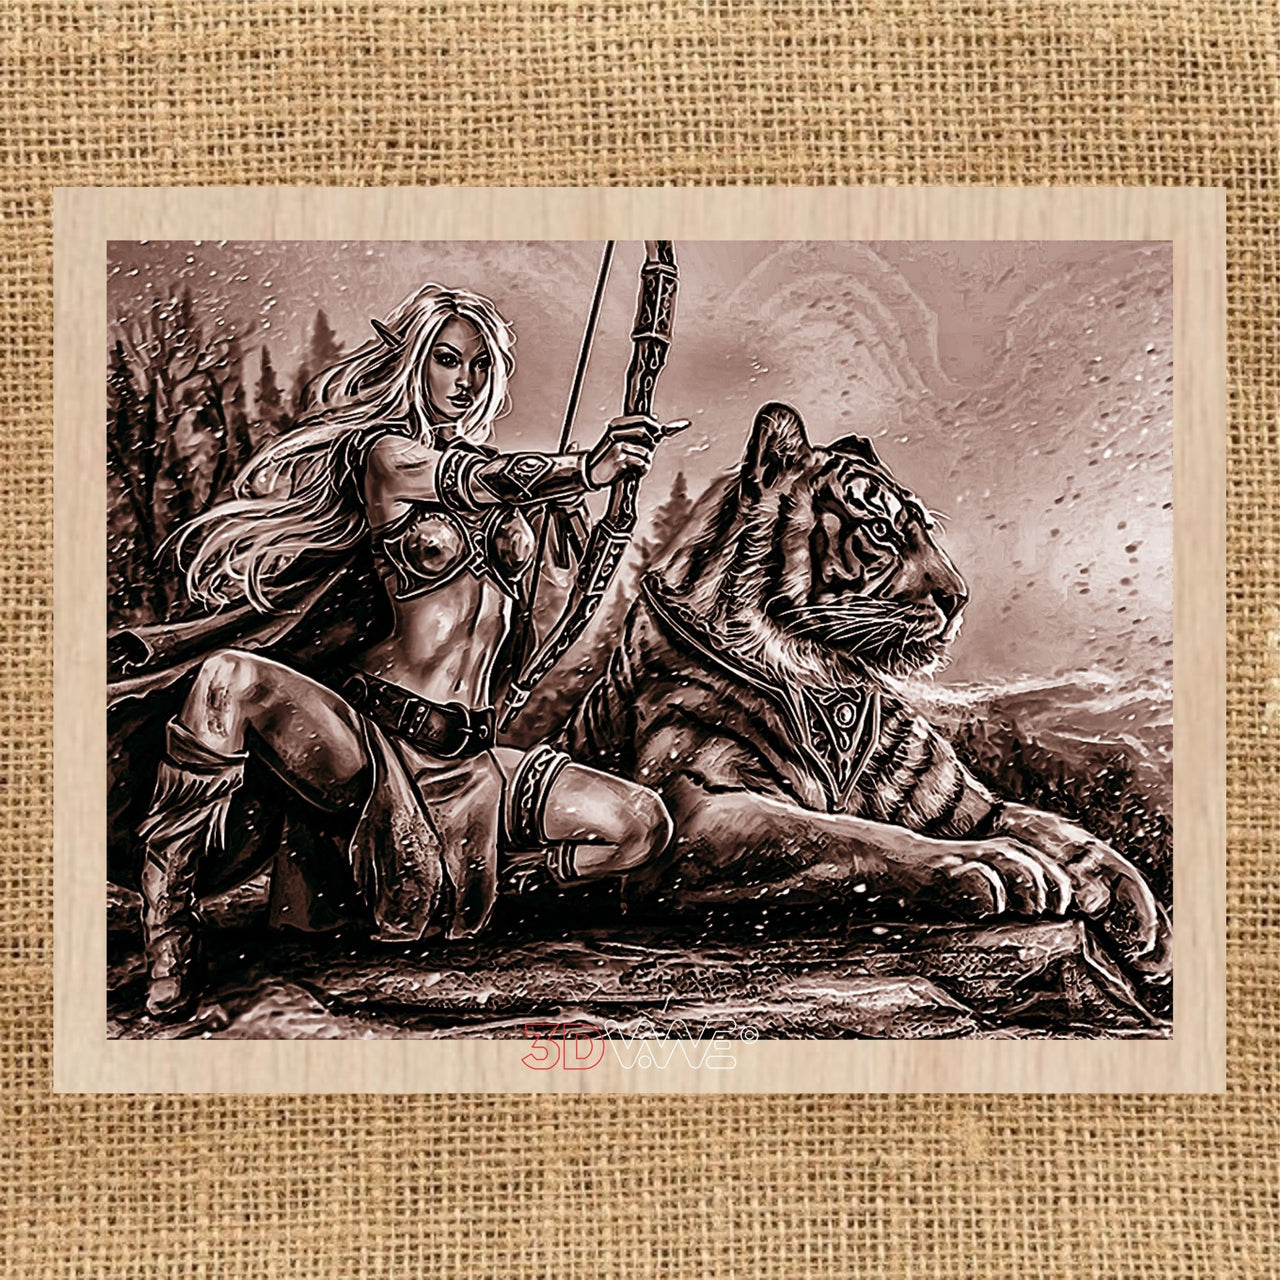 WARRIOR WOMAN WITH A TIGER pyroprinter & laser-ready file 3DWave.us